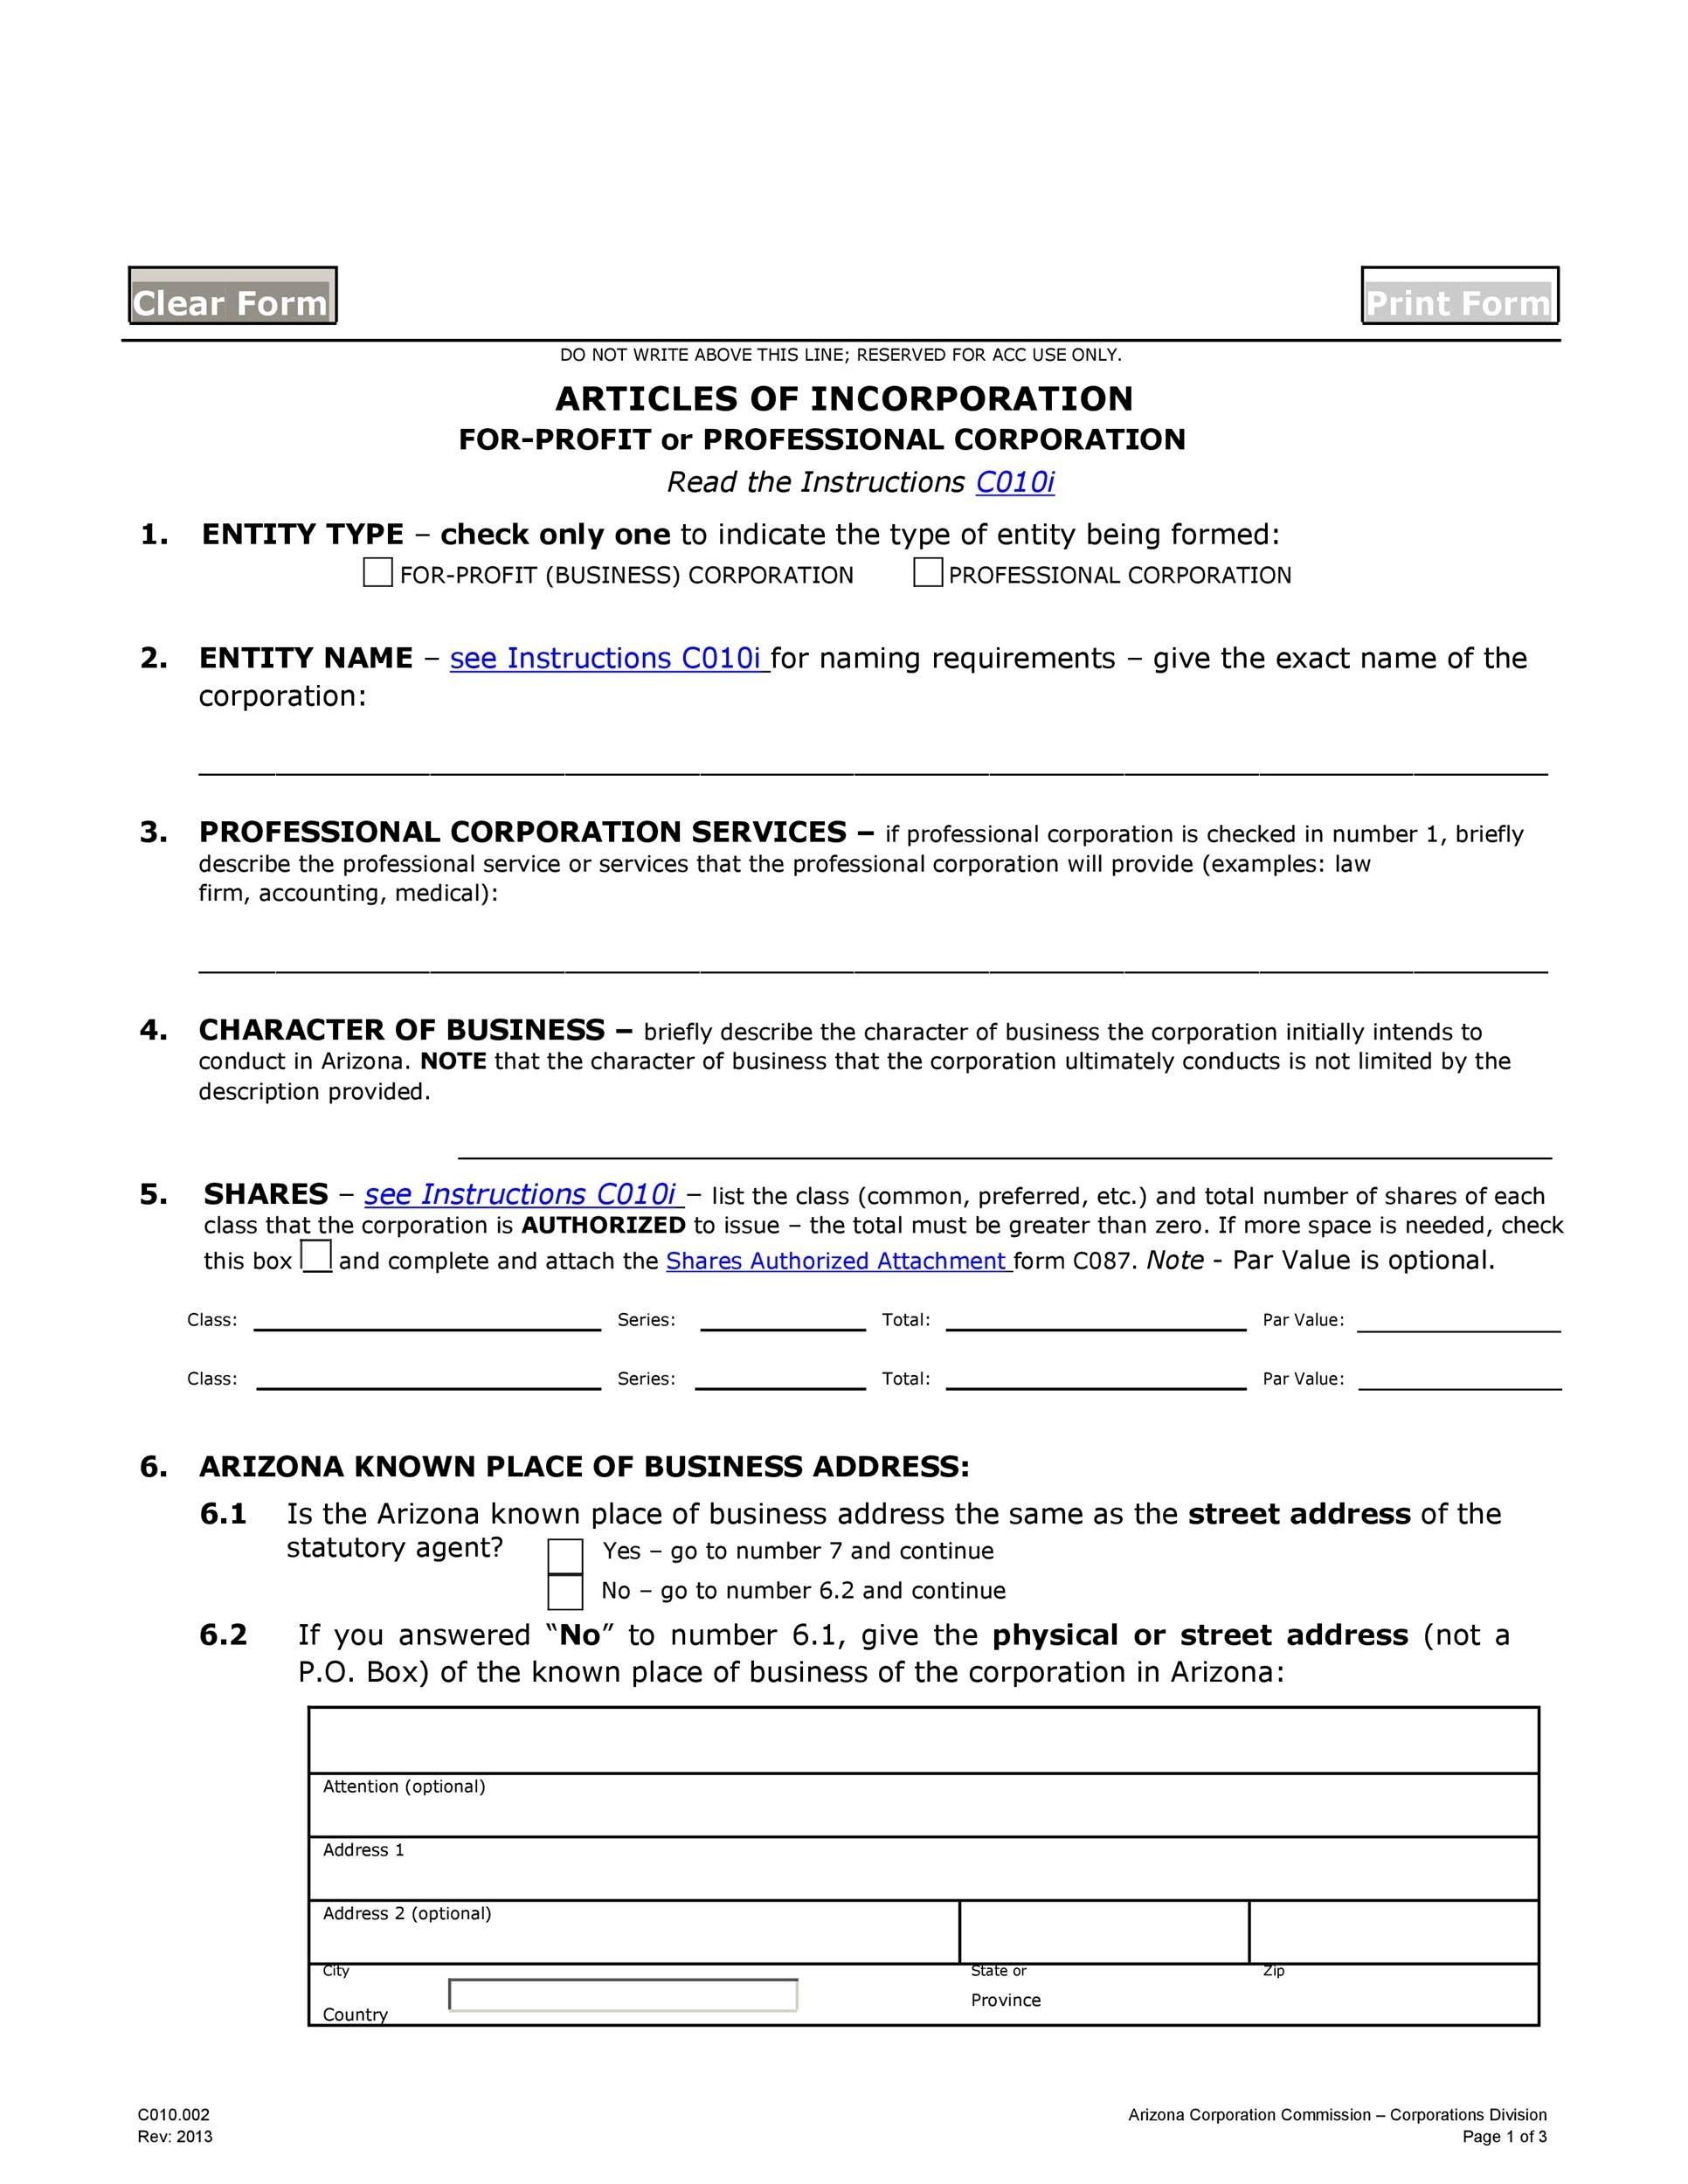 Free articles of incorporation template 25